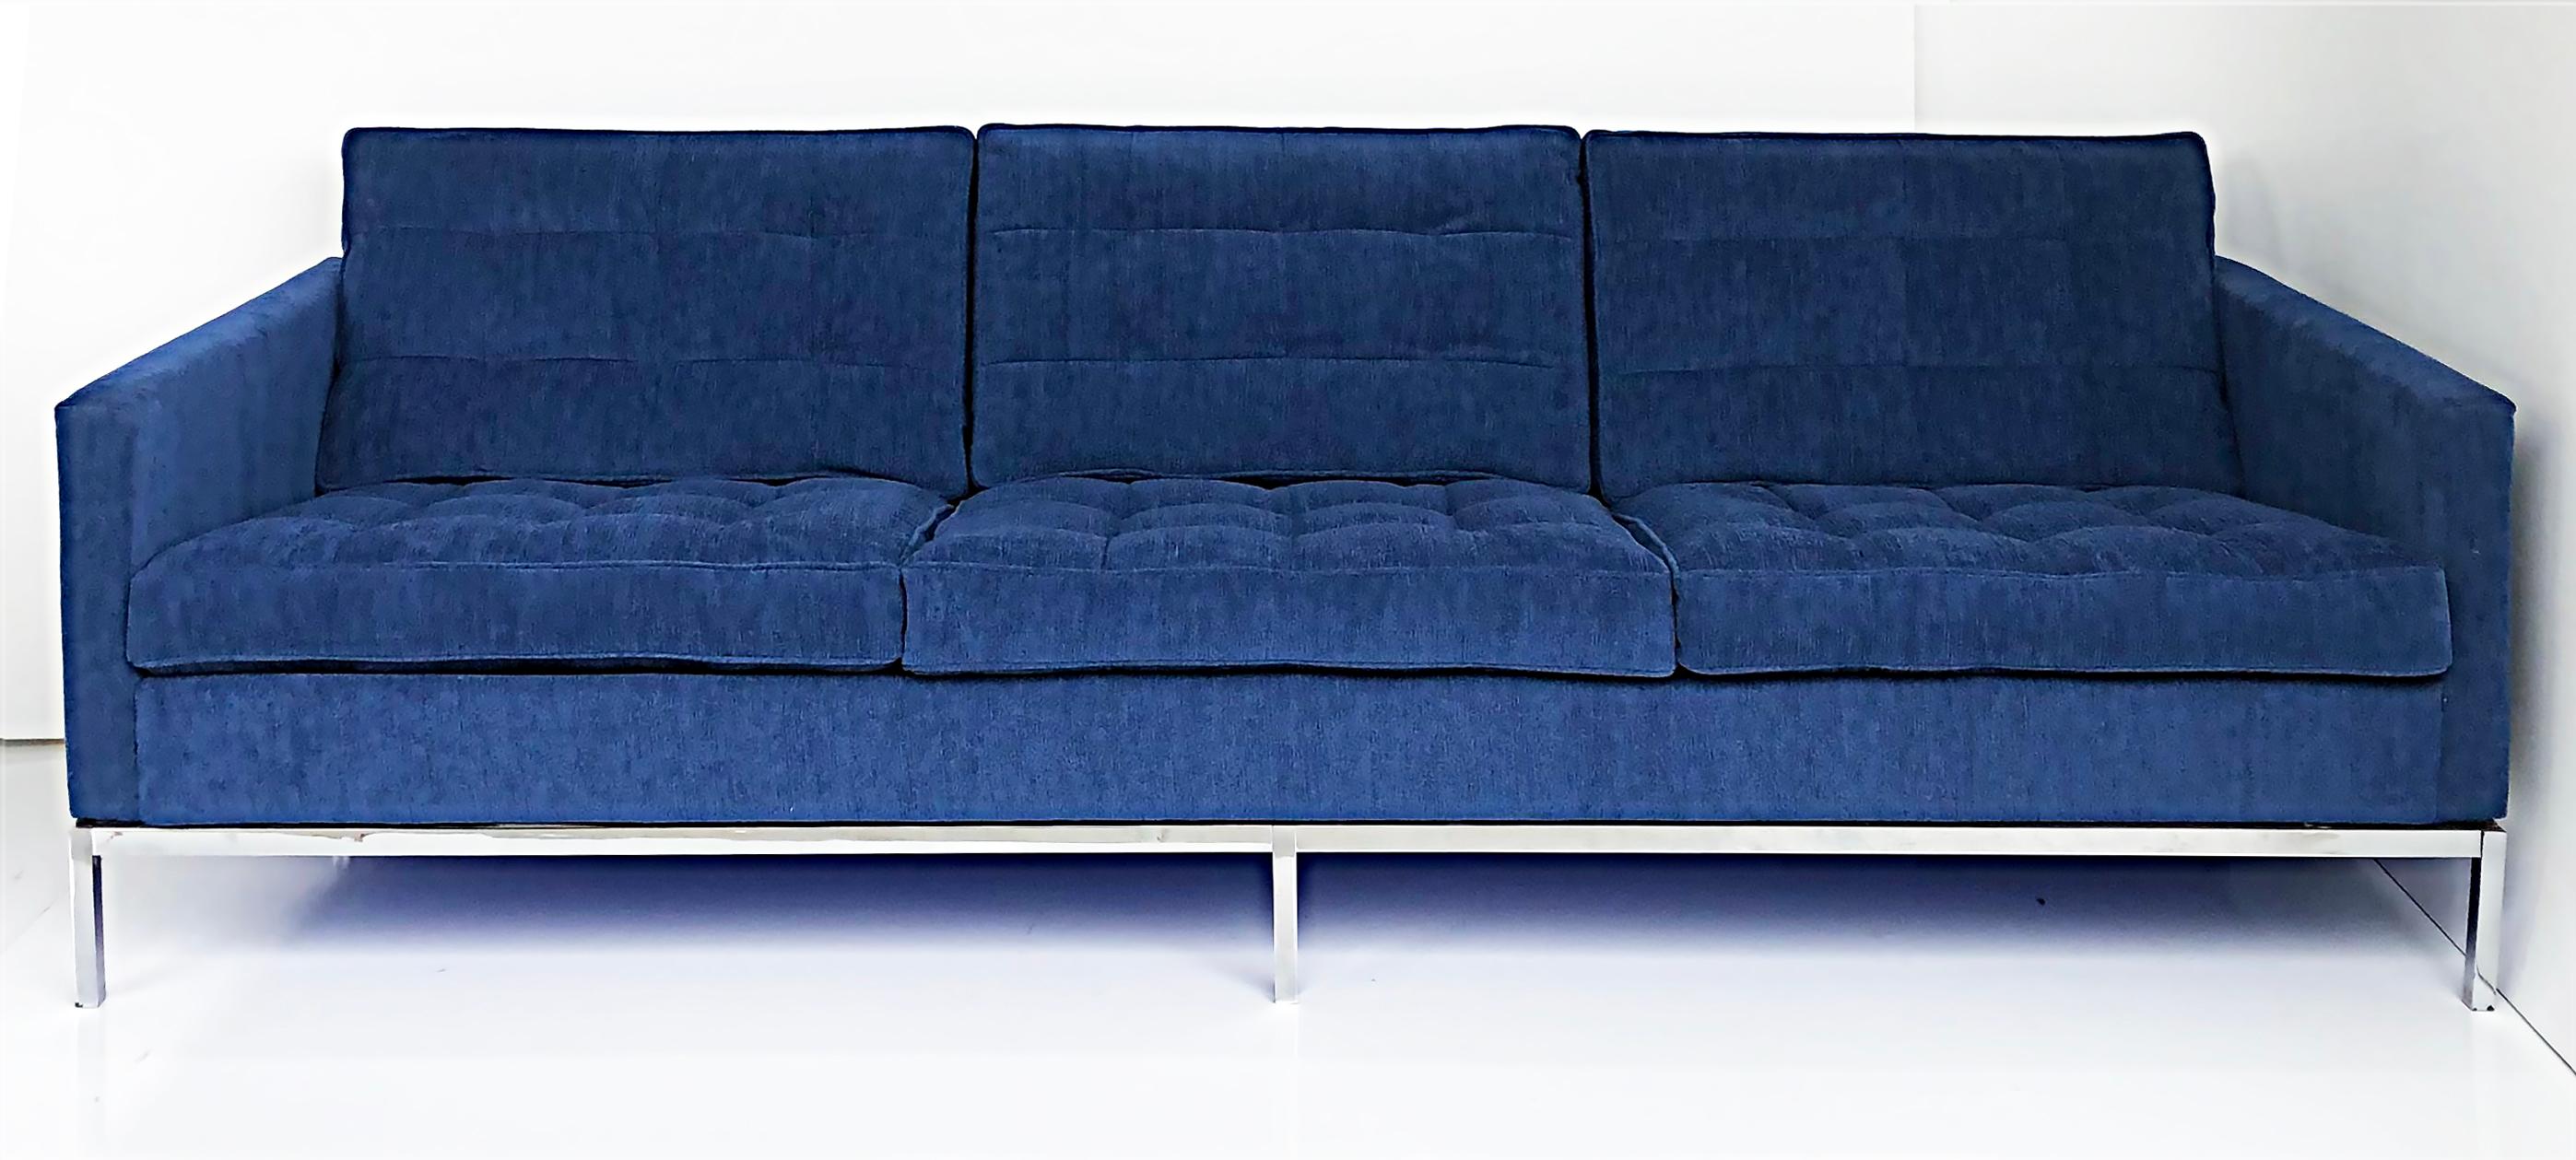 Florence Knoll Associates Mid-century sofa, new Kravet fabric upholstery

Offered for sale is a Florence Knoll Associates mid-century modern three-seater sofa newly upholstered with Kravet fabric (Sapphire Color 50 Viscose/Linen Blend). The sofa